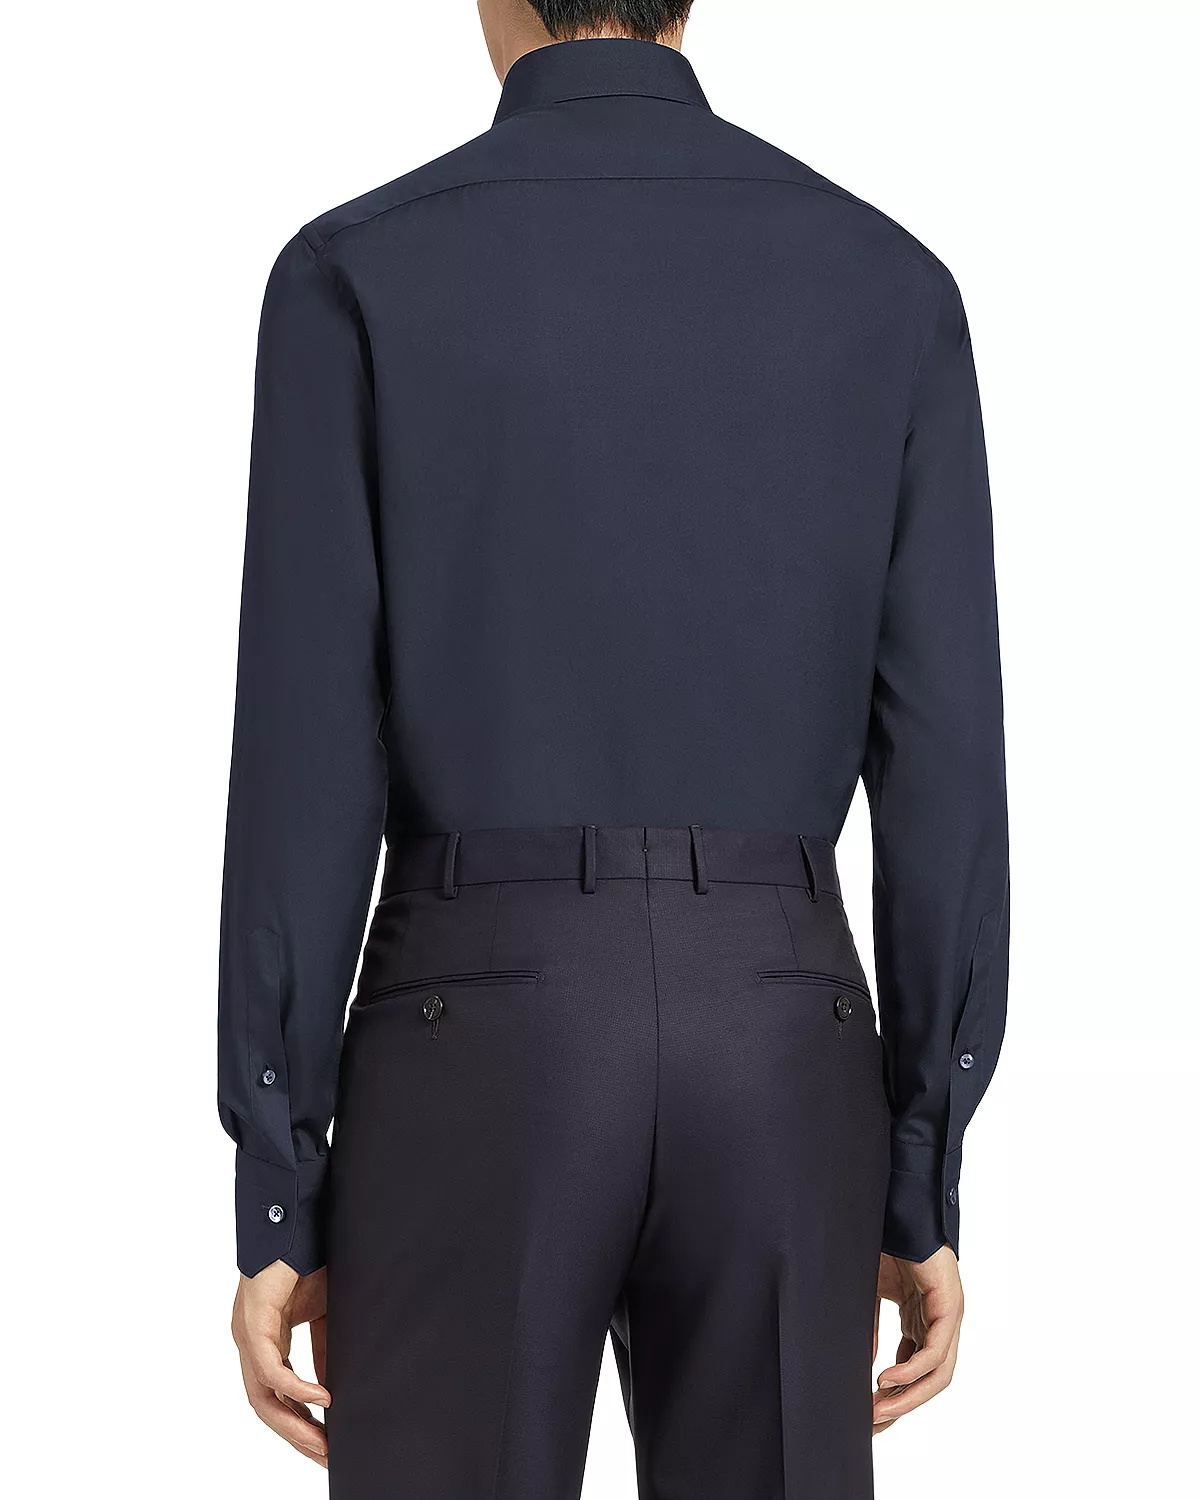 Navy Blue Trofeo™ Long Sleeve Tailored Fit Shirt - 2